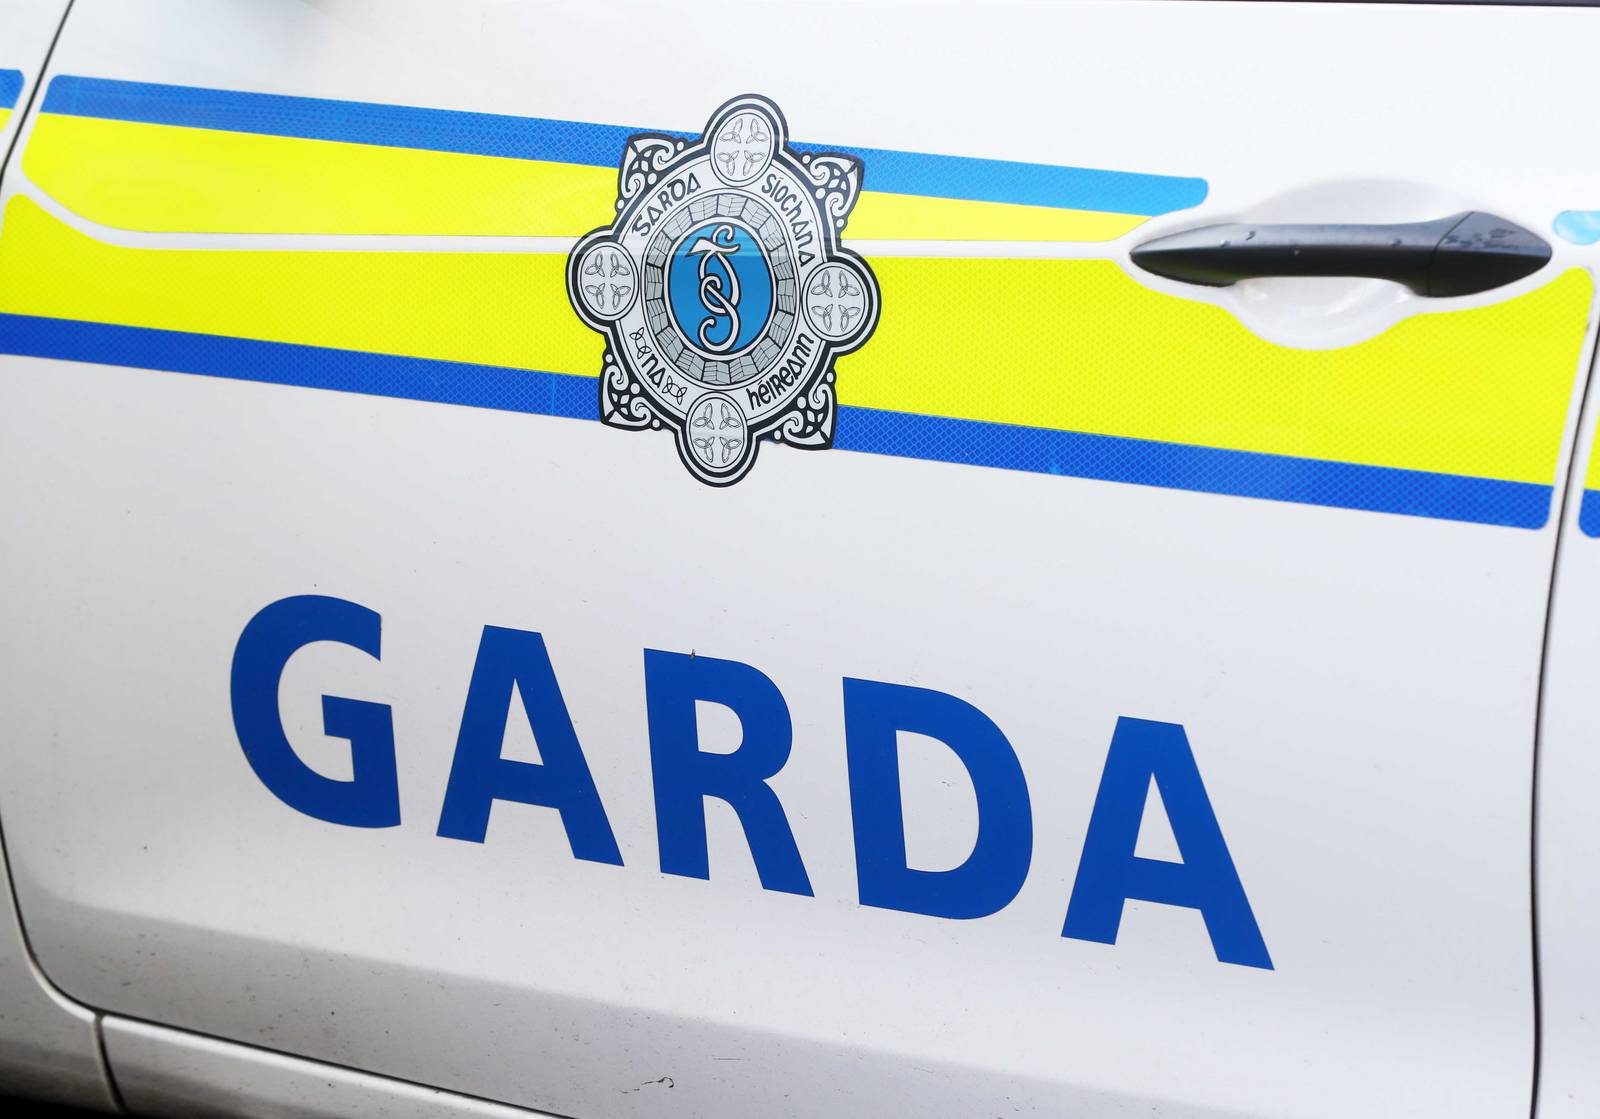 FILE GARDA STOCK

A stock picture of the Garda badge logo. PRESS ASSOCIATION Photo. Picture date: Wednesday January 16, 2019. Photo credit should read: Niall Carson/PA Wire